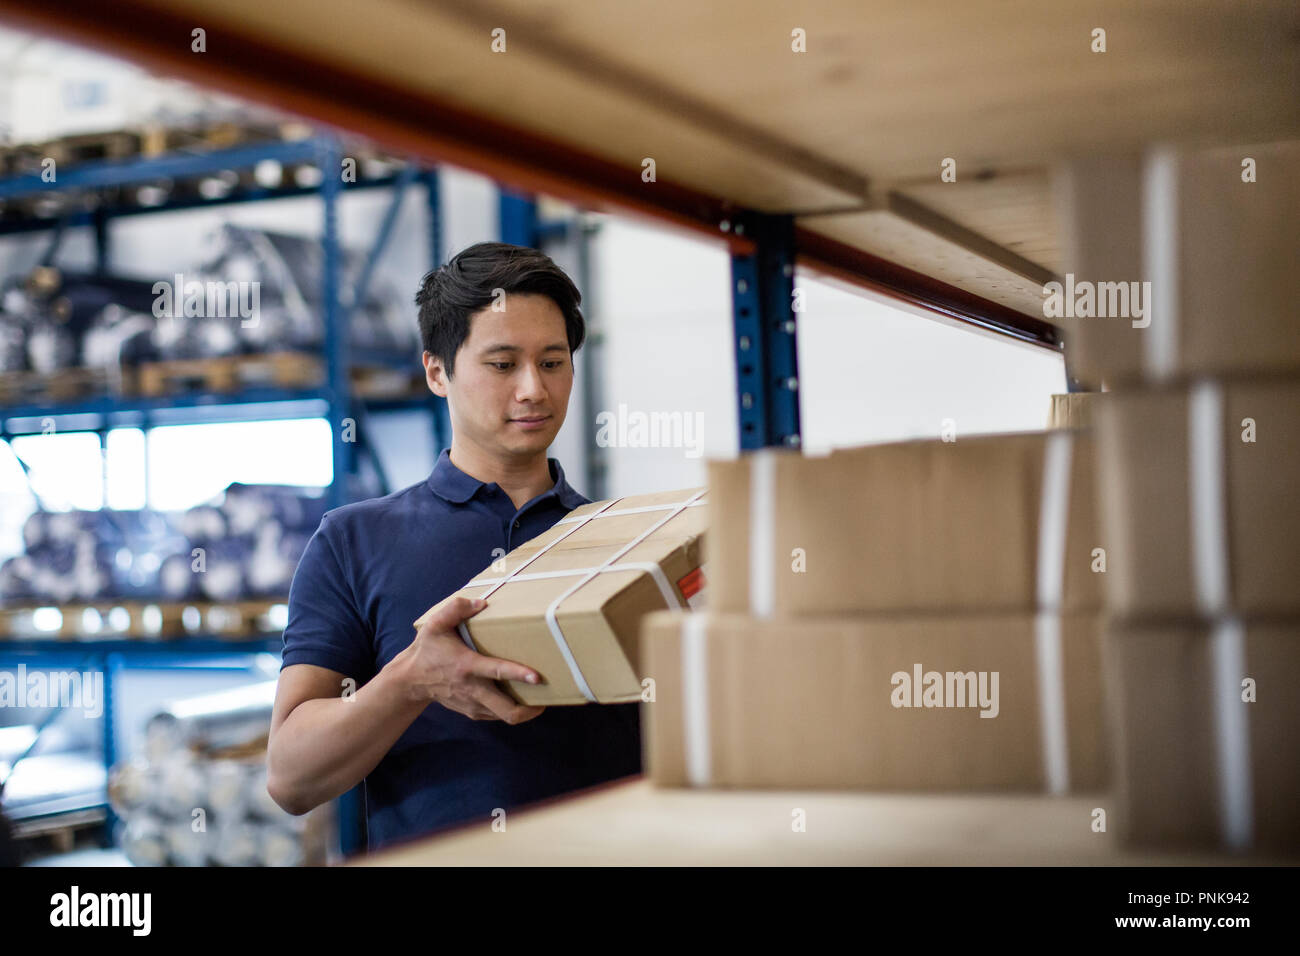 Male picking up box from shelf in distribution warehouse Stock Photo